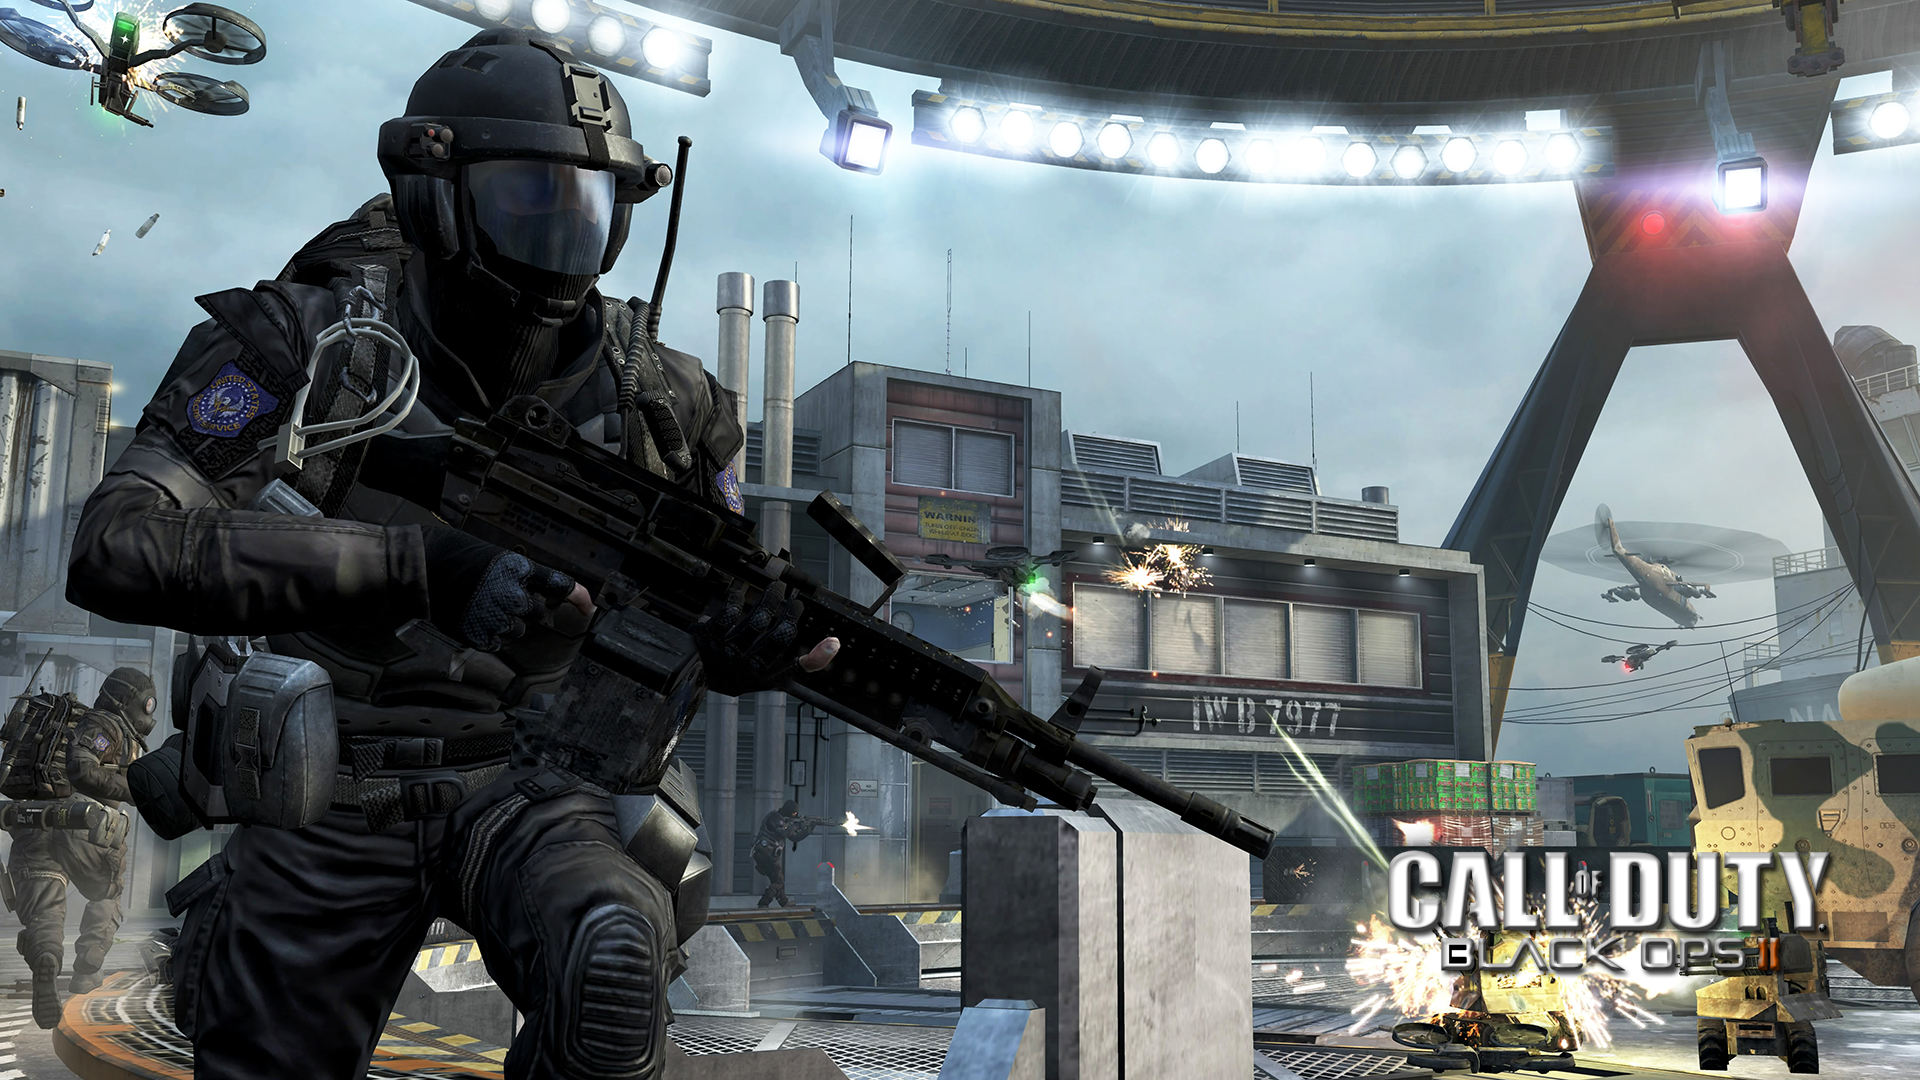 Black Ops 2 Wallpapers Free Download 